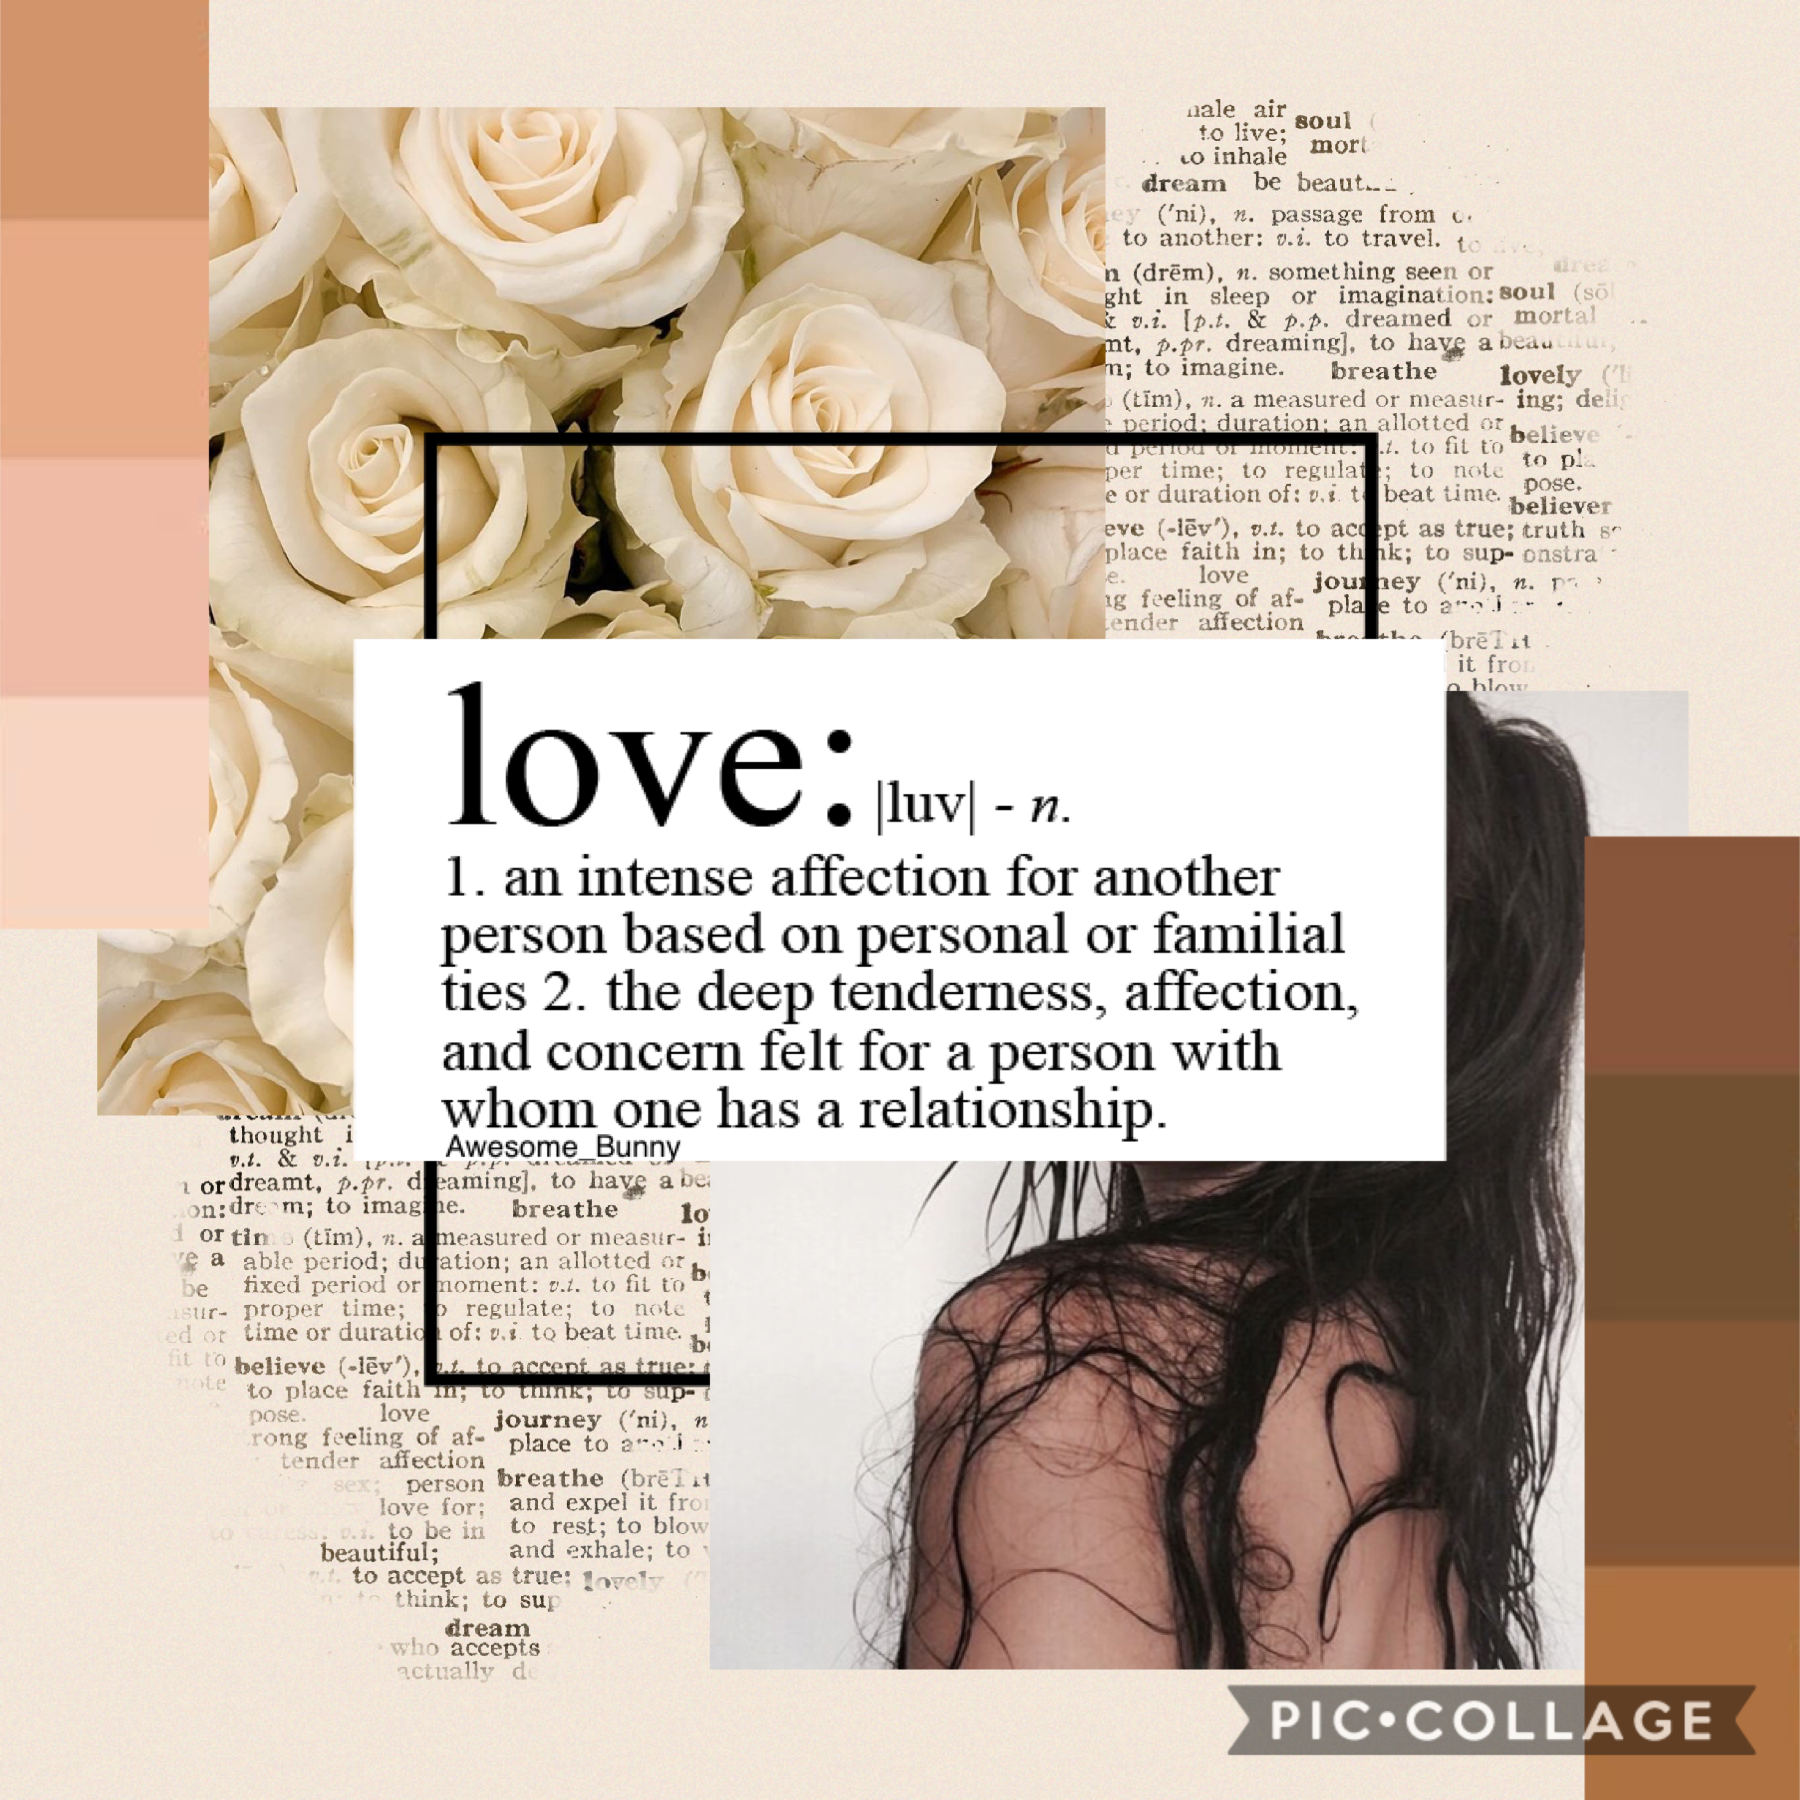 2/14/20 | What’s your definition of love?